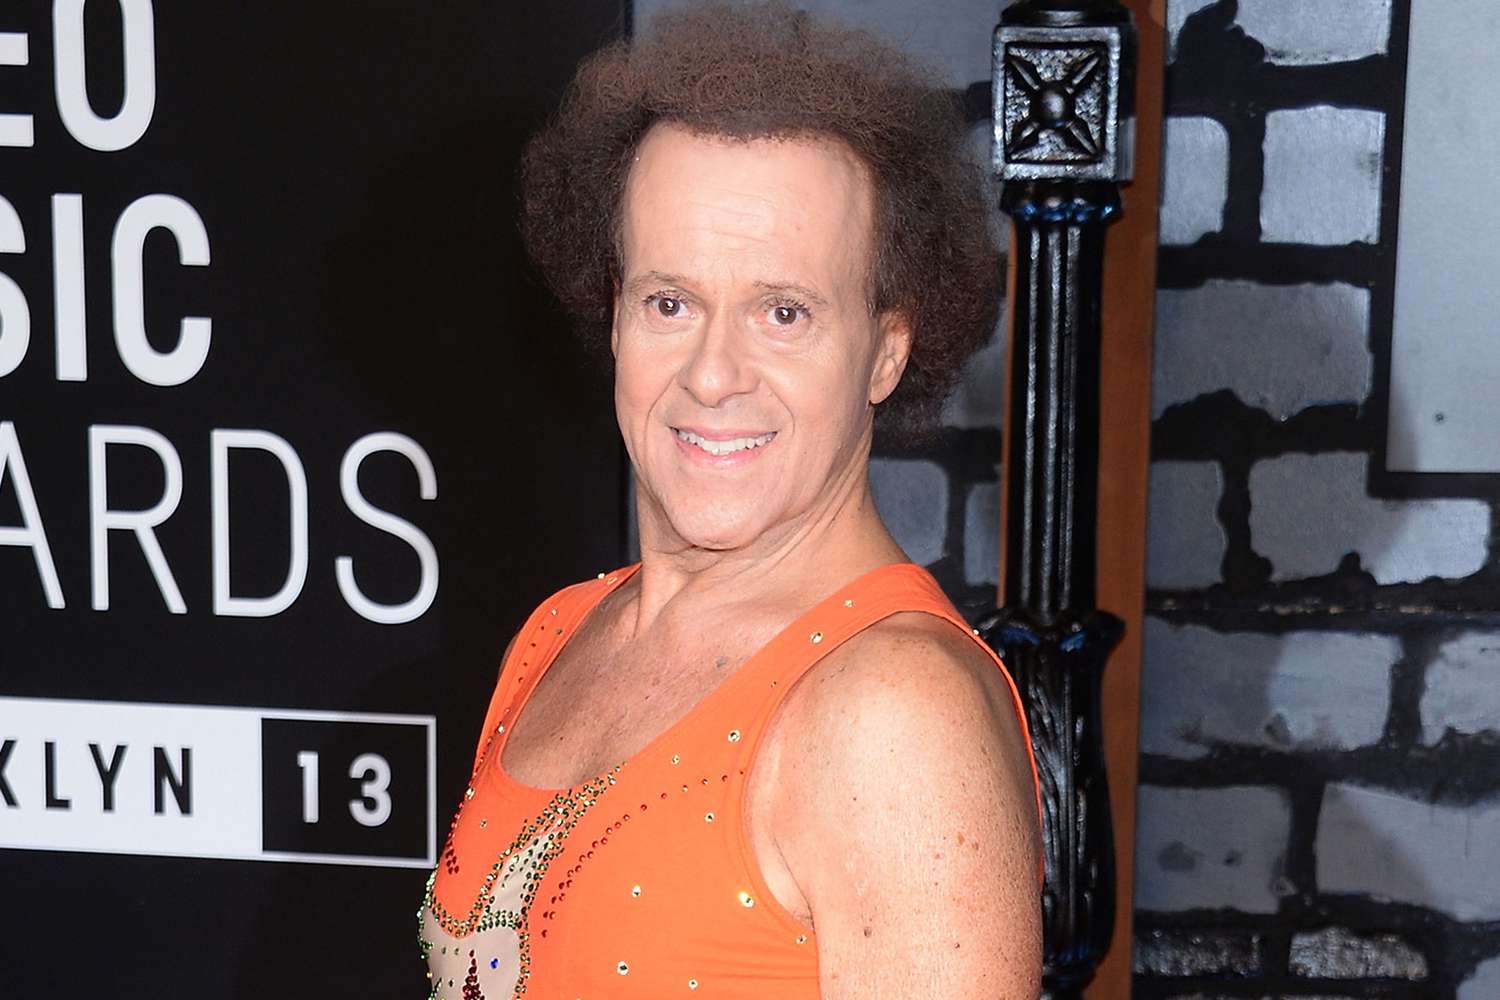 richard-simmons-shares-uplifting-message-about-overcoming-bullies